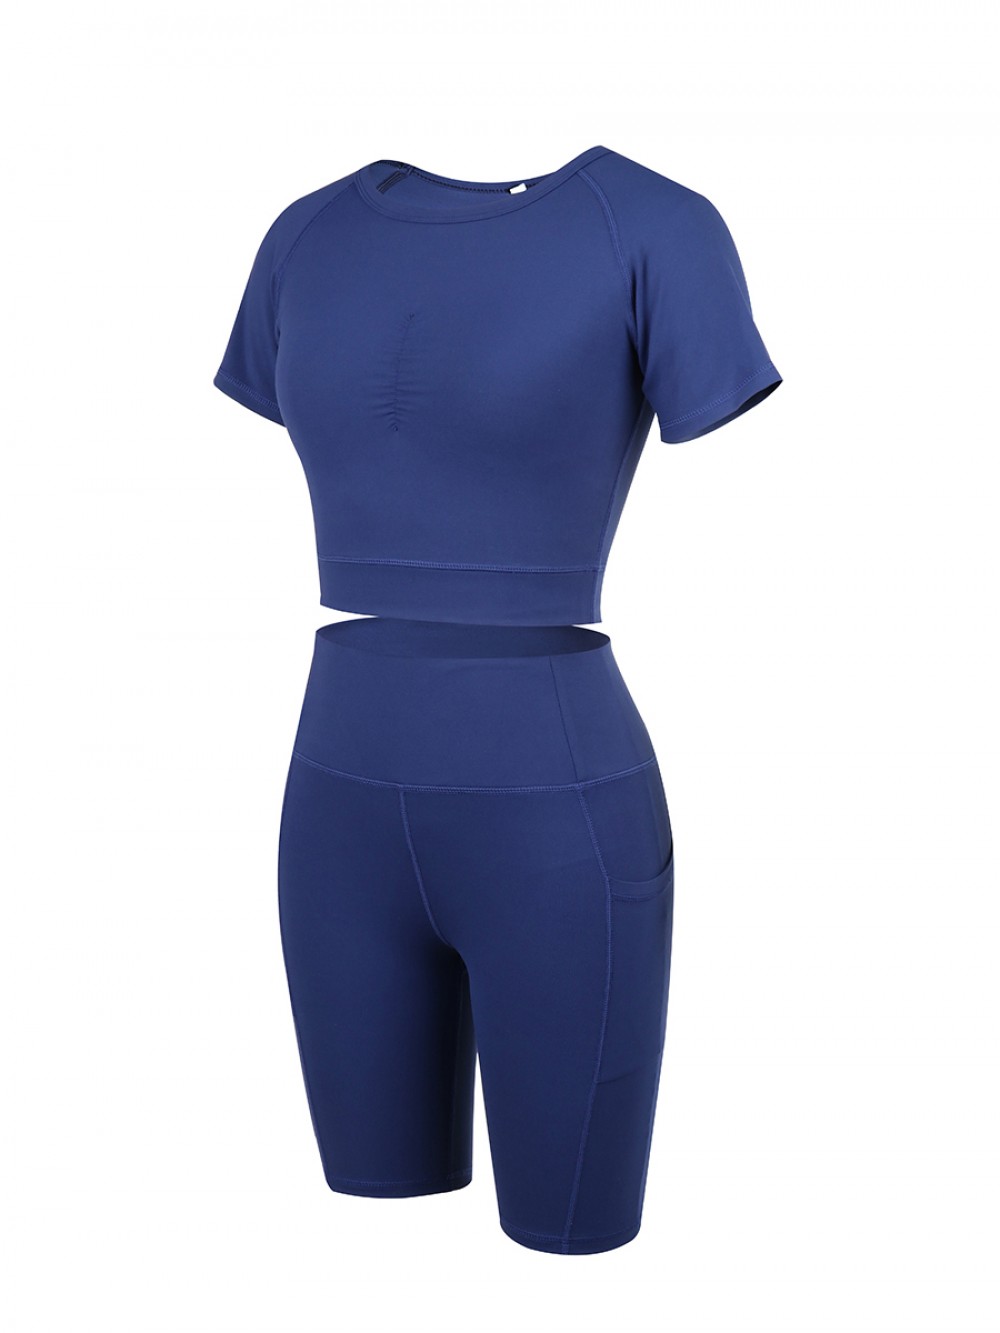 Simply Chic Dark Blue Ruched Athletic Set Solid Color Glamor